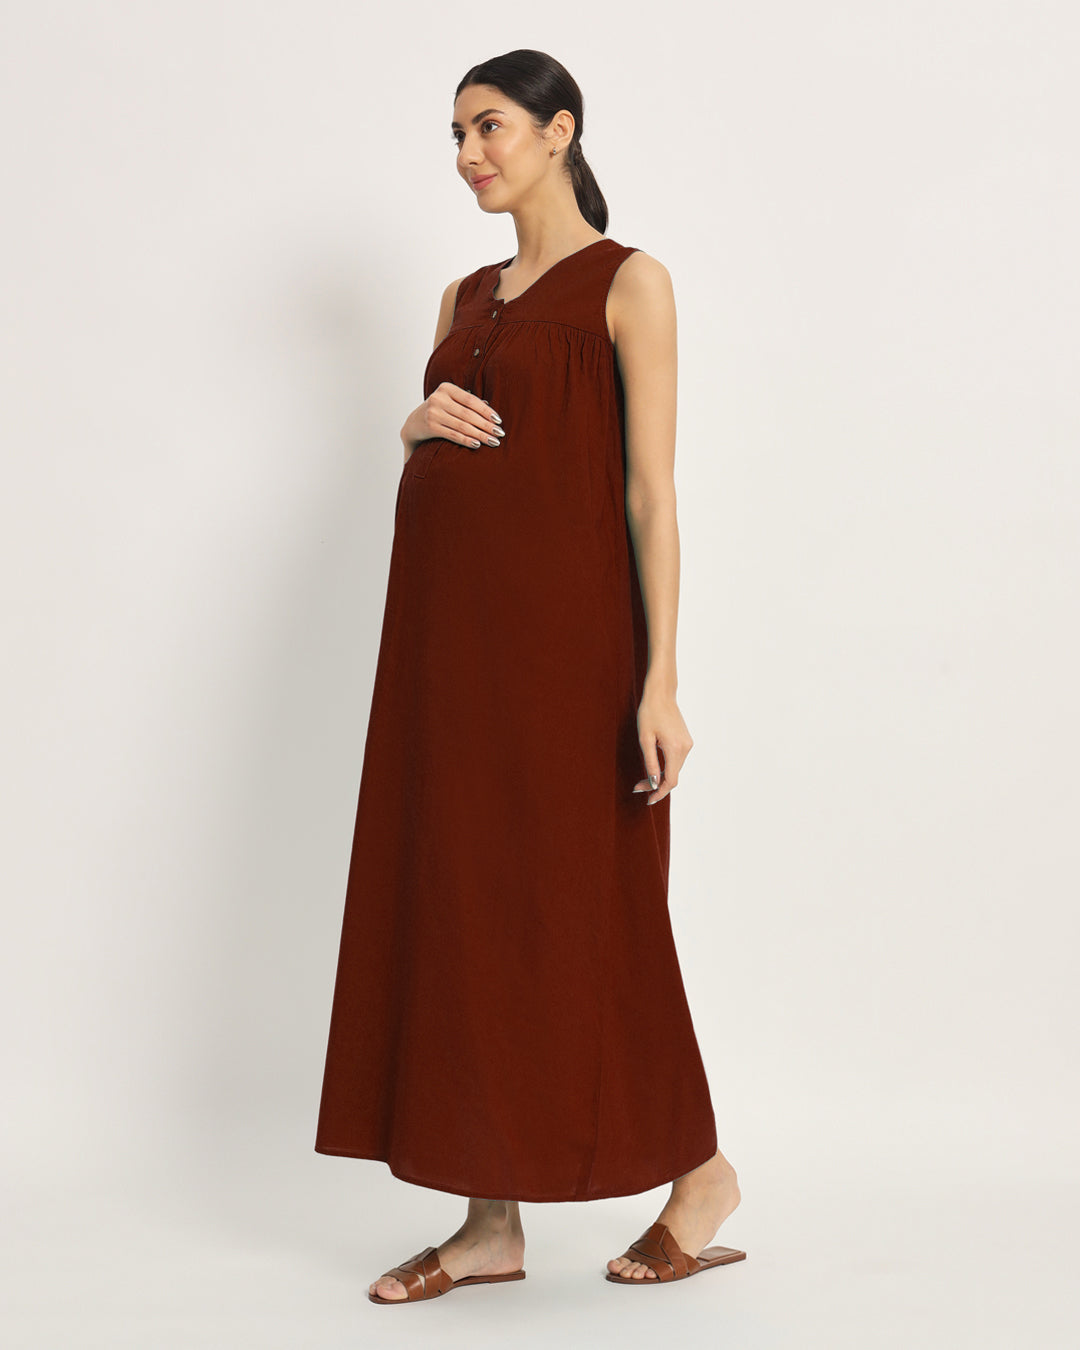 Russet Red Mommylicious Maternity & Nursing Dress